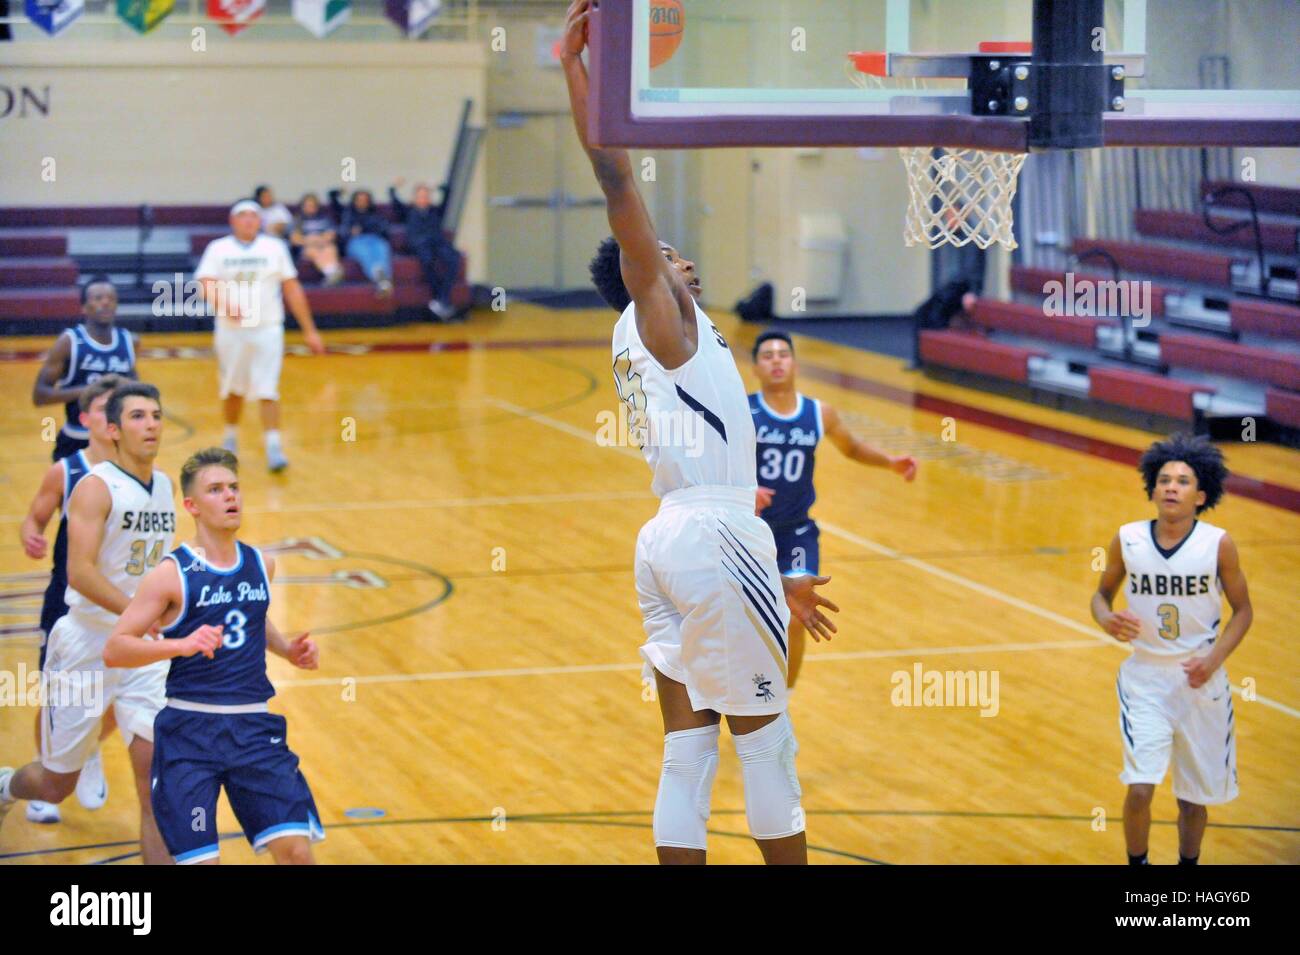 A player elevating well off the floor to slam home two points from above the basket during a high school basketball game. USA. Stock Photo